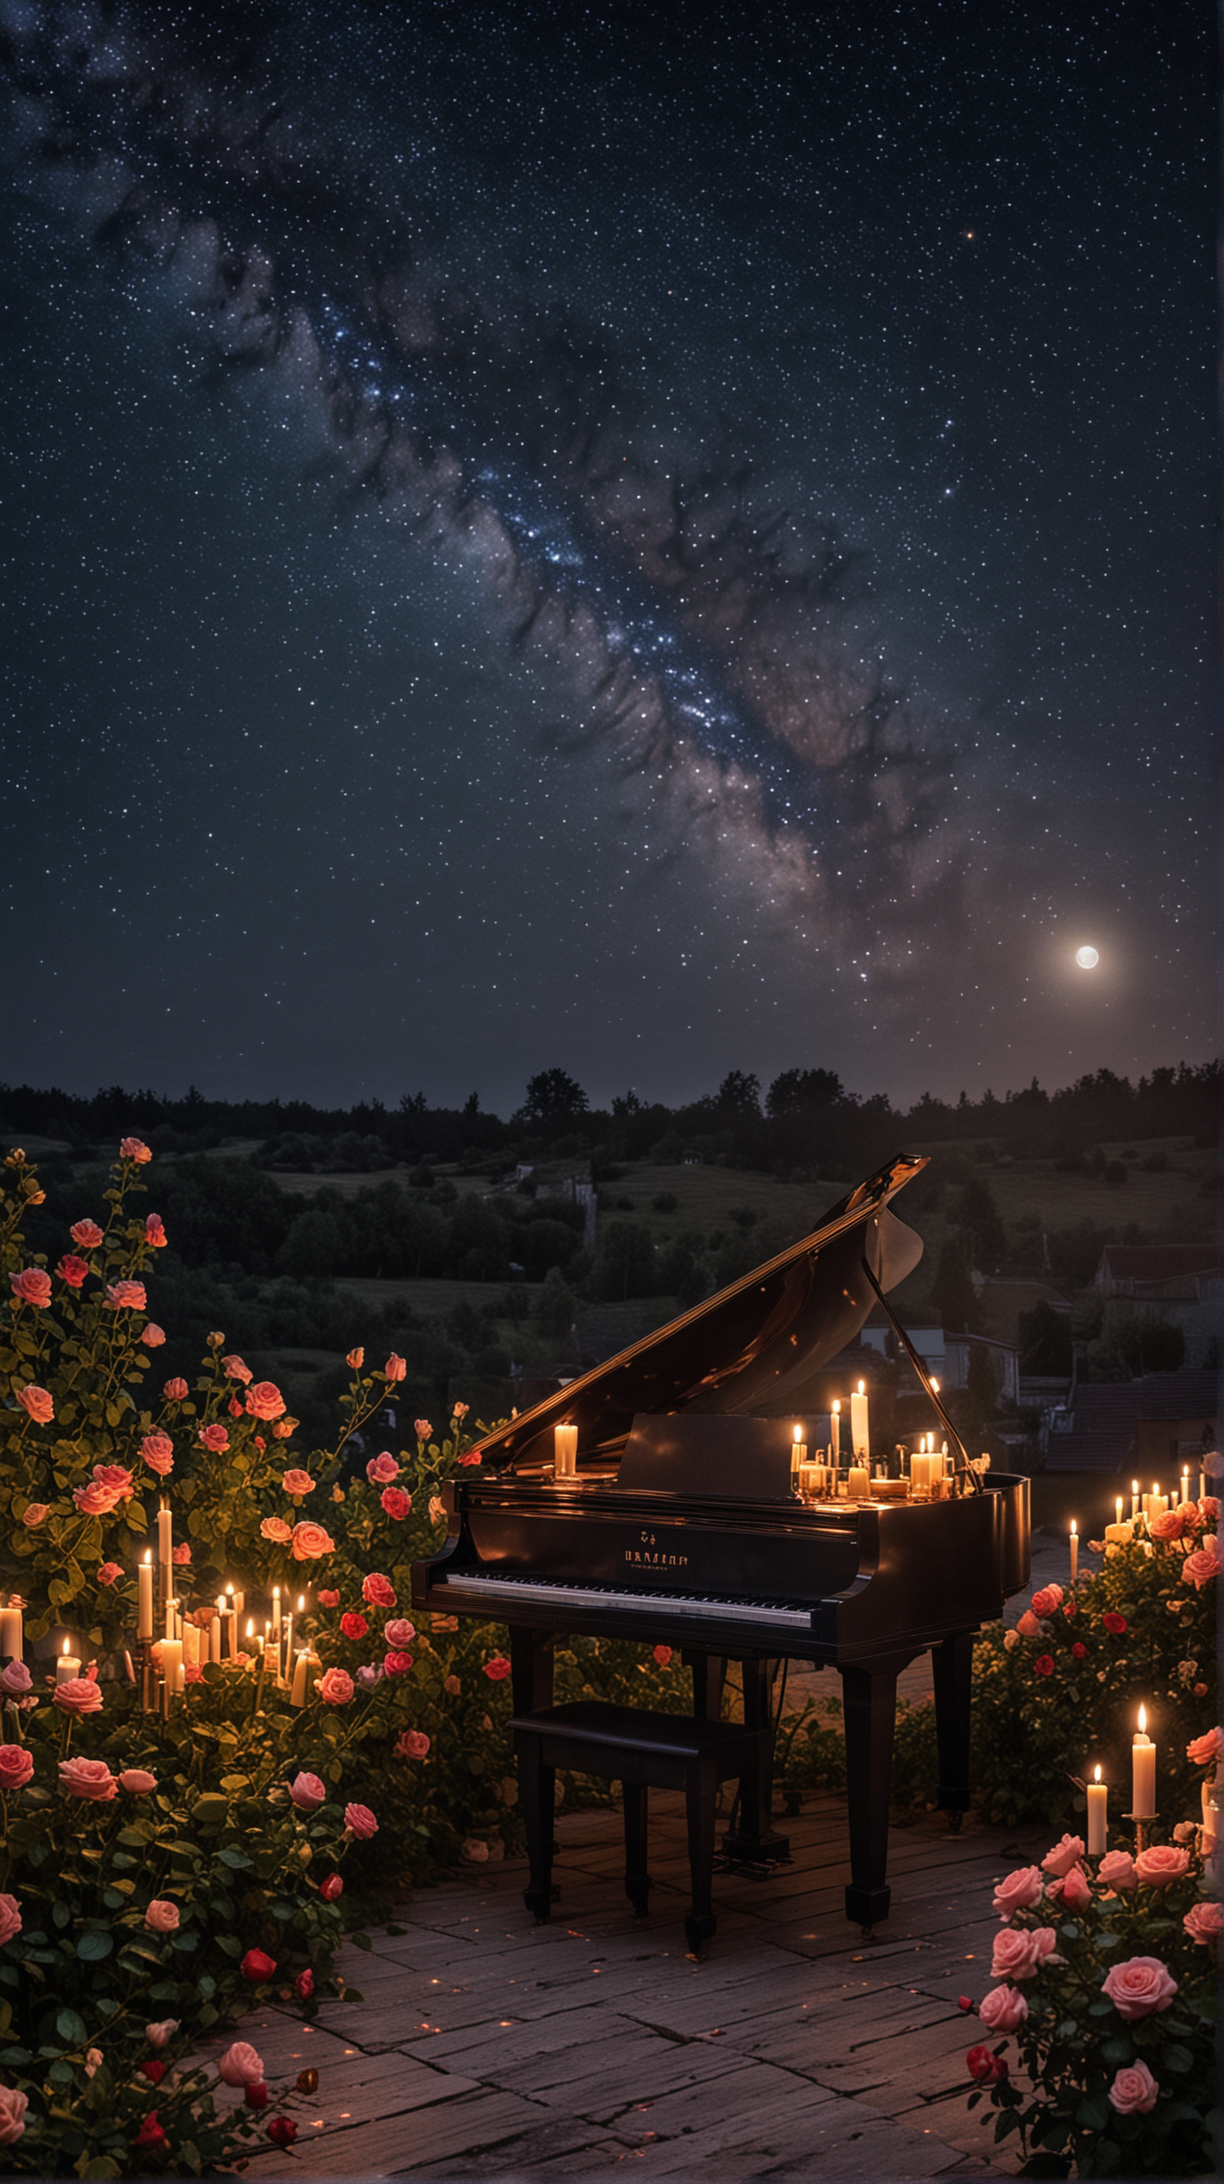 Evening, nature, starry sky, piano, candles, roses, flowers